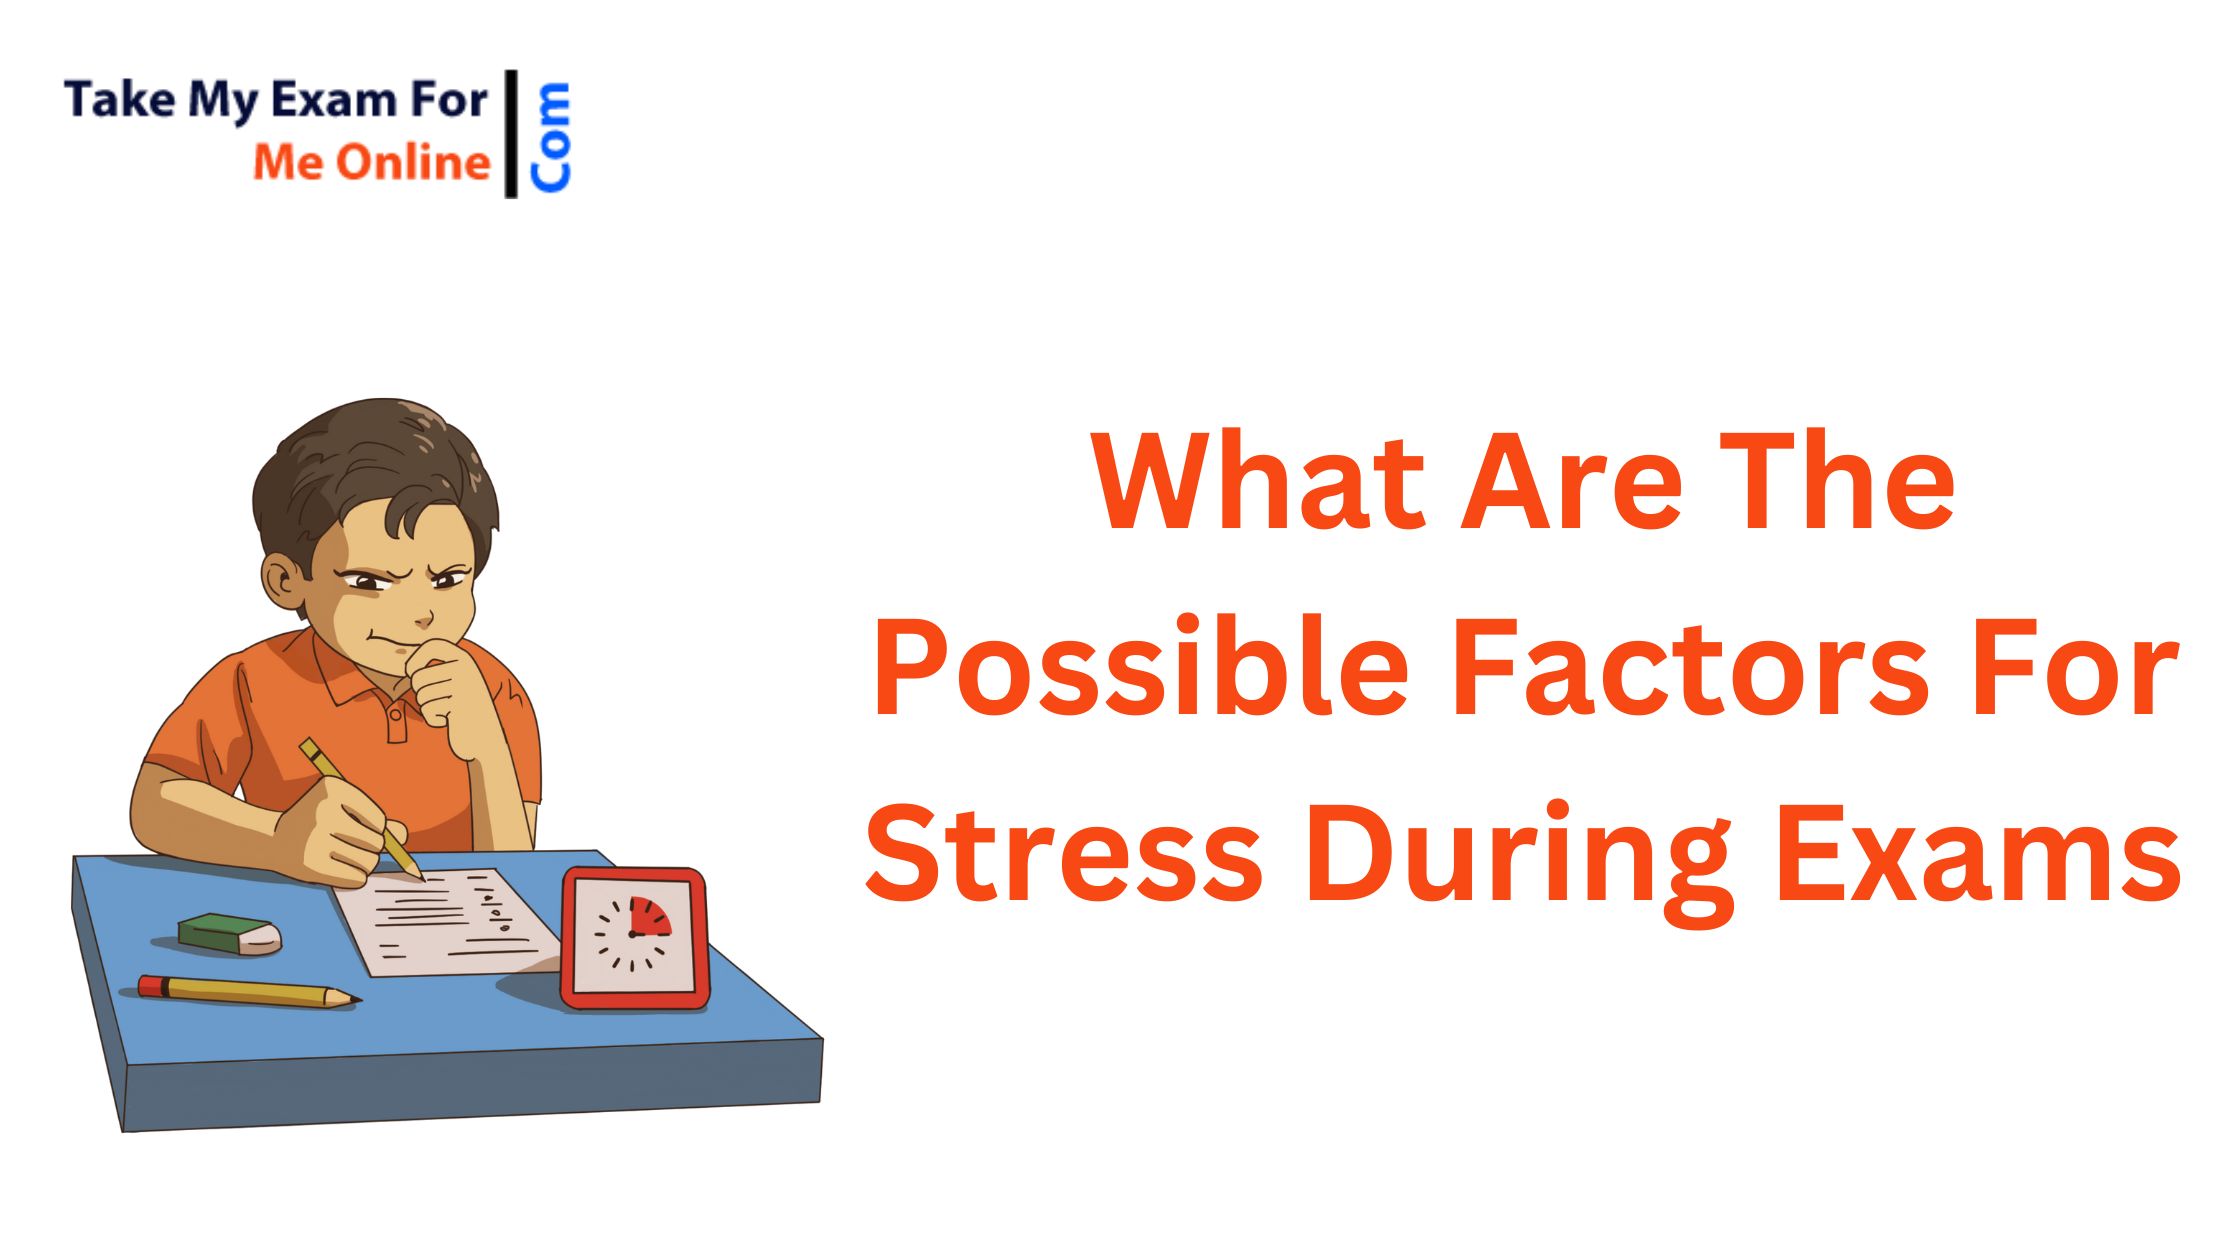 What are the possible factors for stress during exams